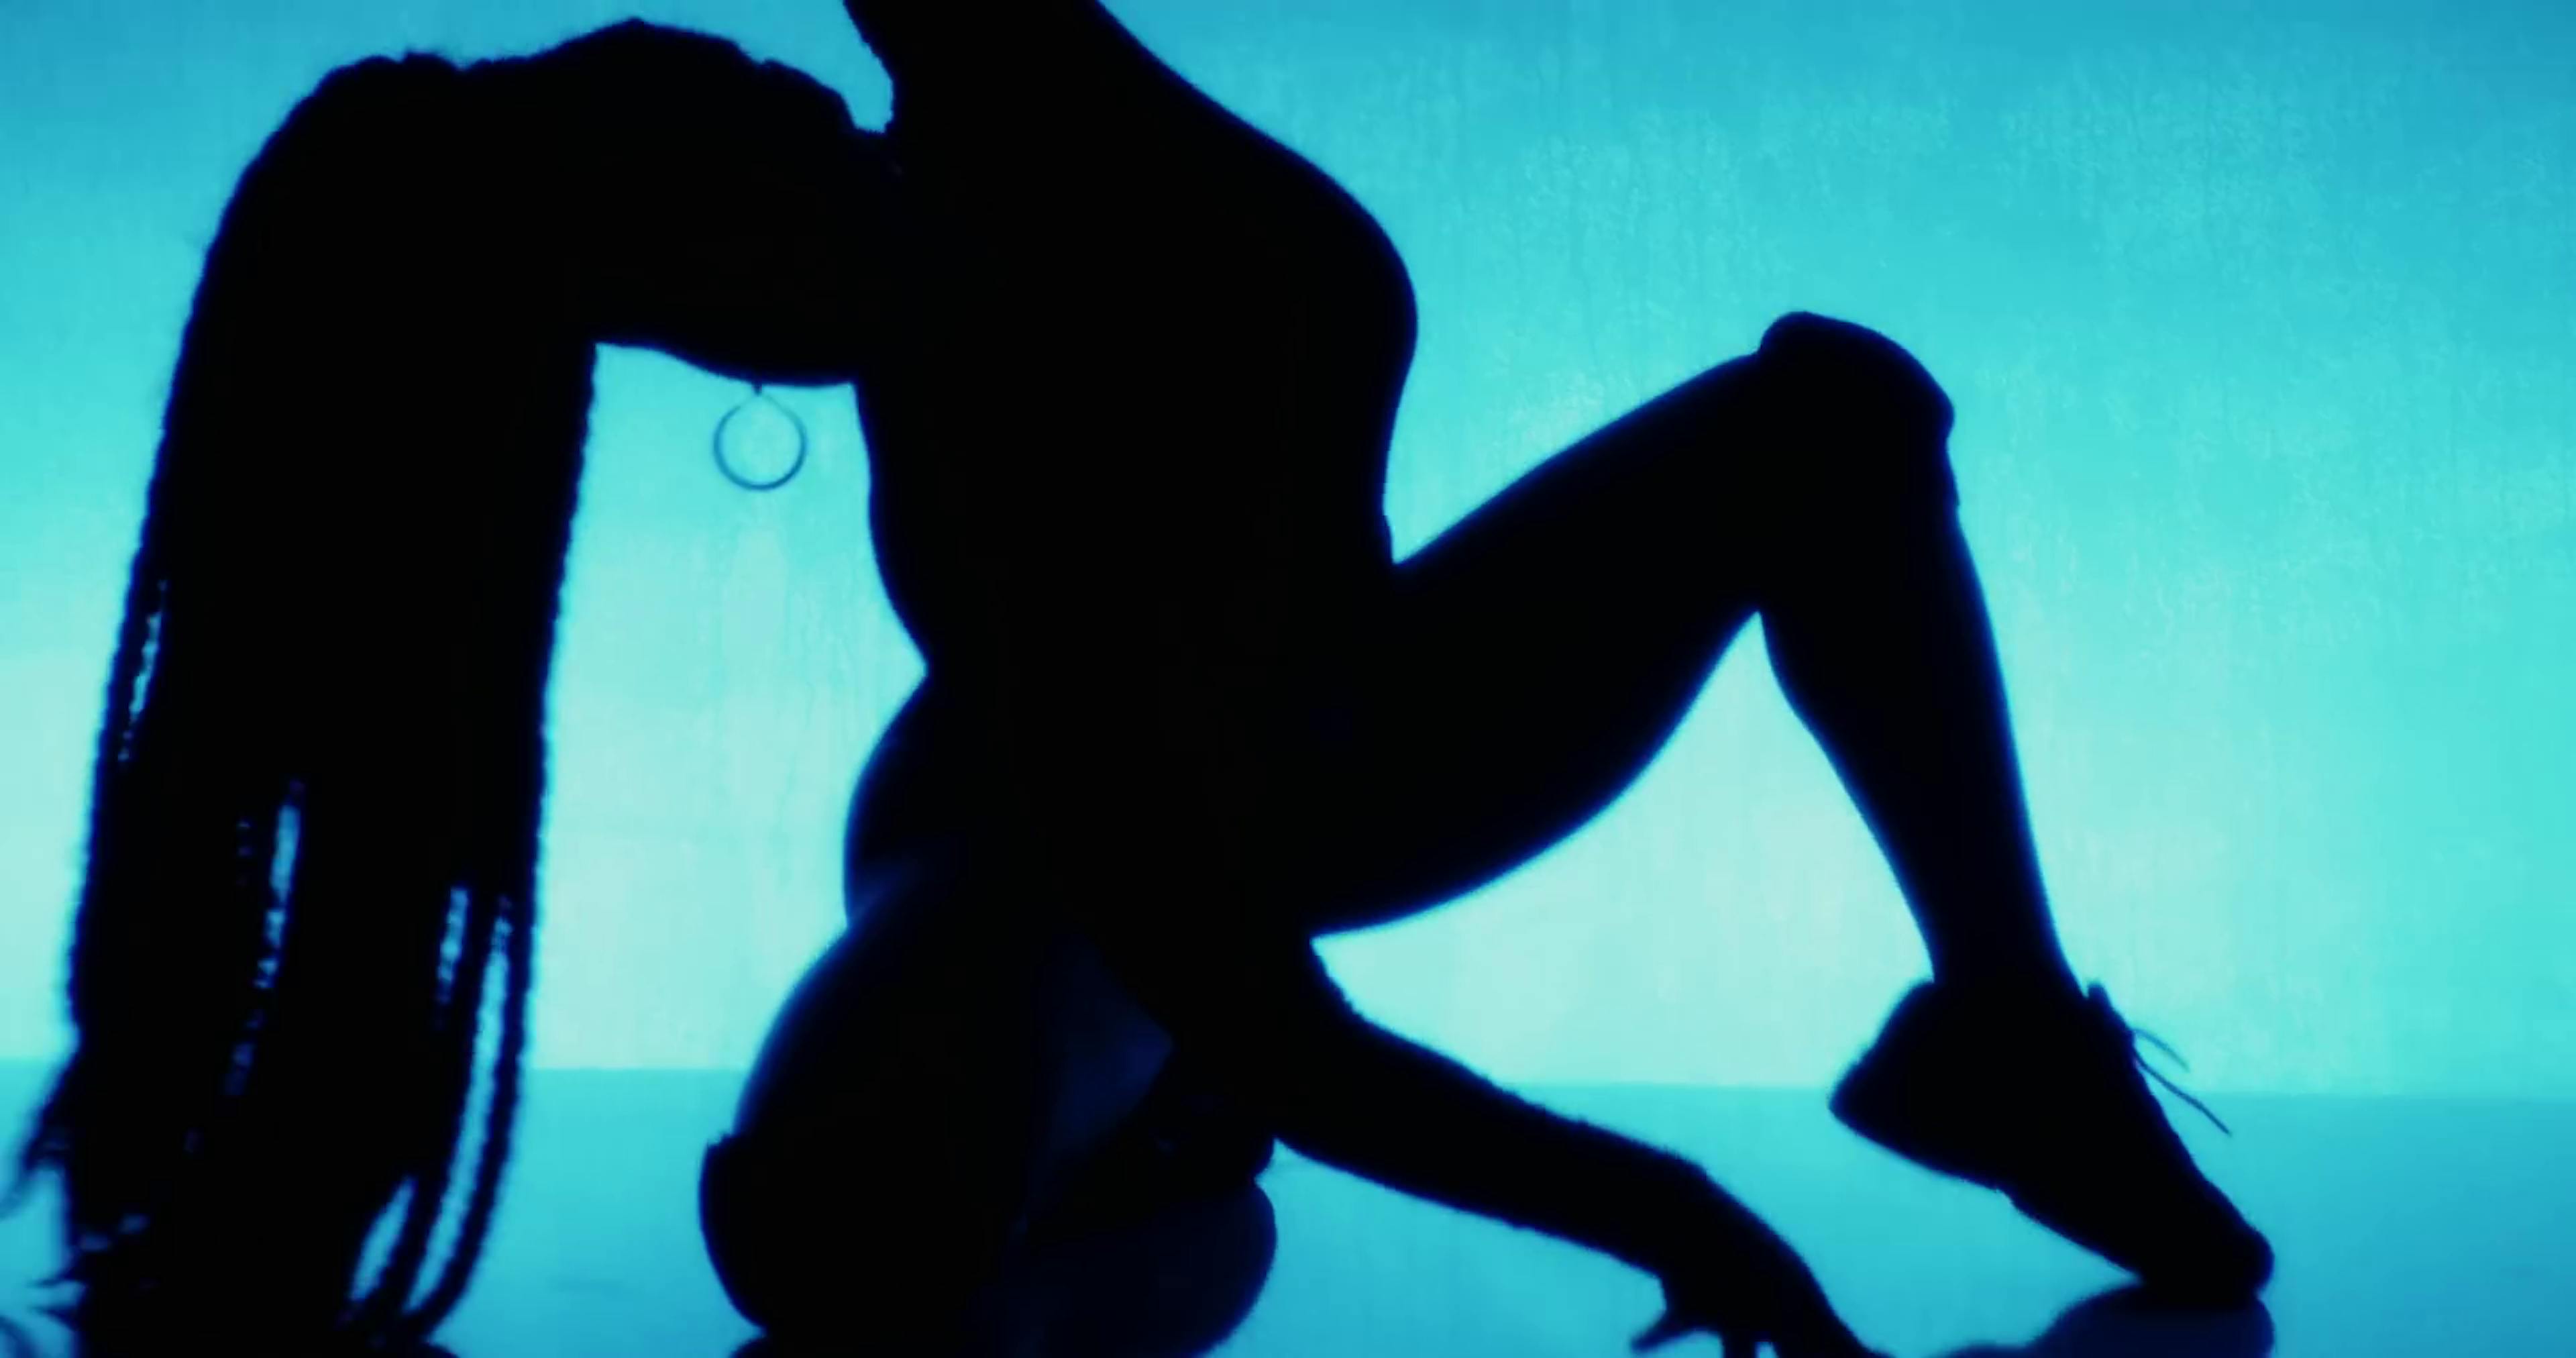 A silhouette of a woman against a blue background, dancing.